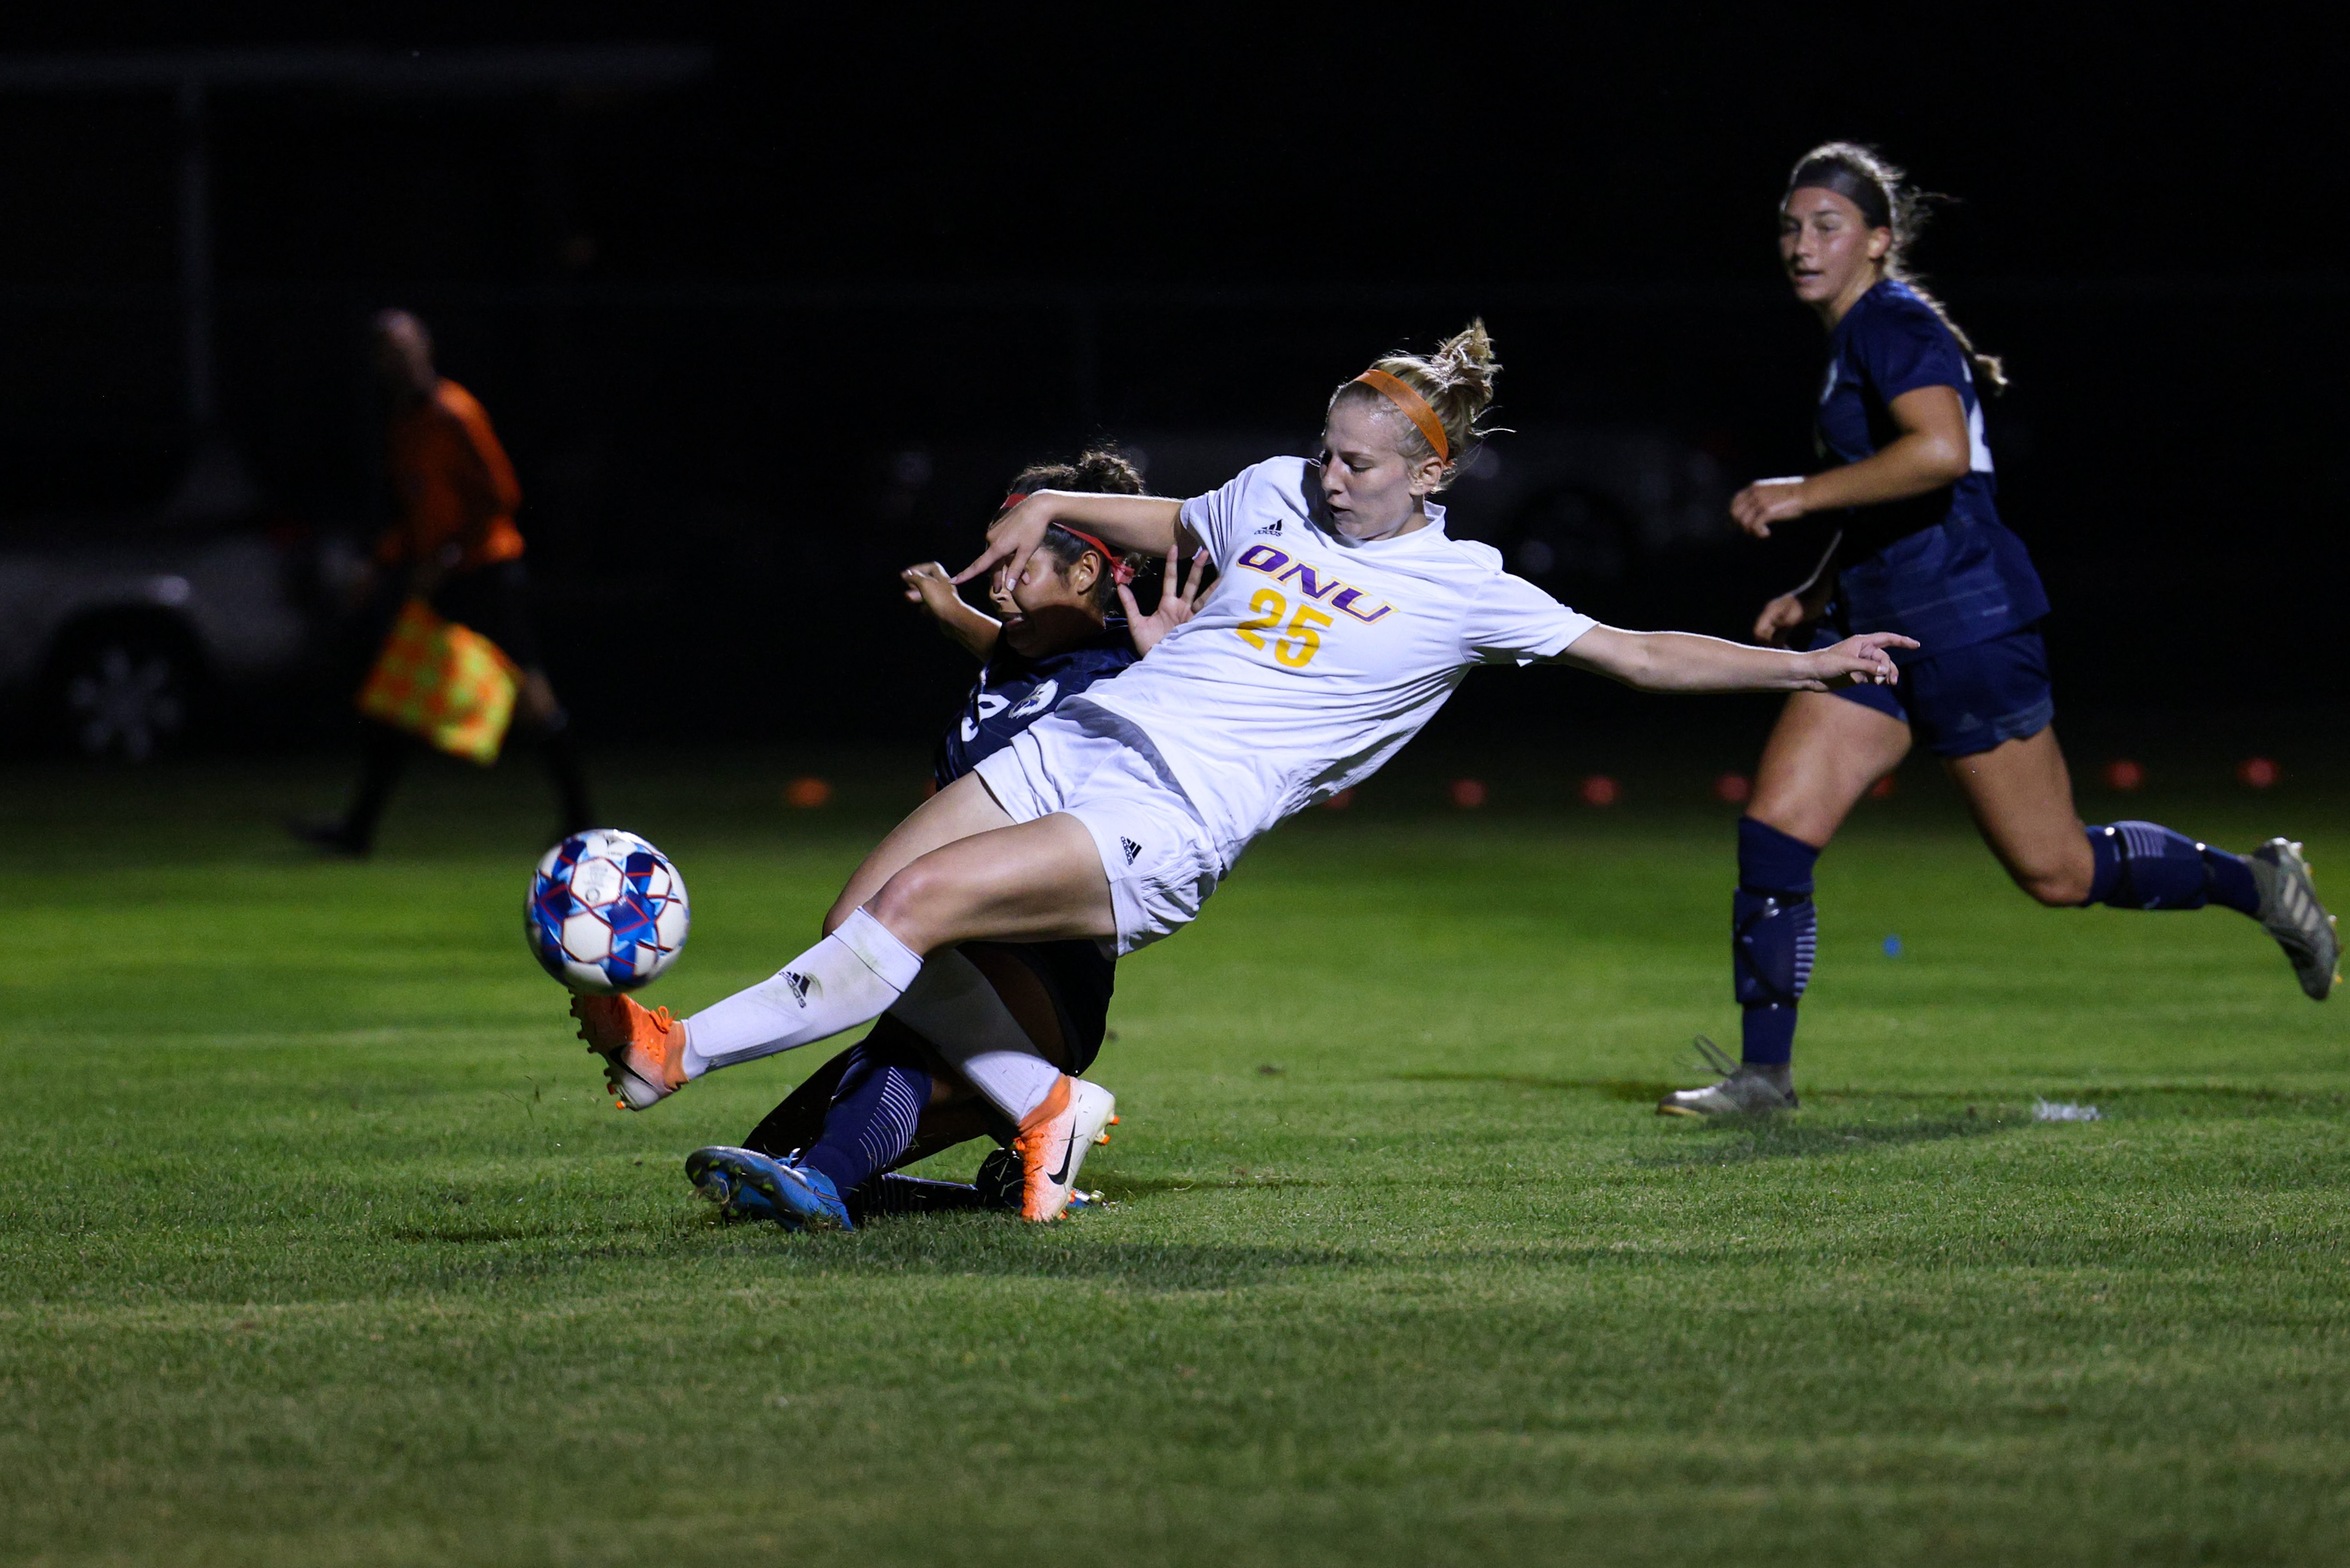 TIGERS AND EAGLES END IN 1-1 DRAW TO STAY UNDEFEATED IN CCAC PLAY